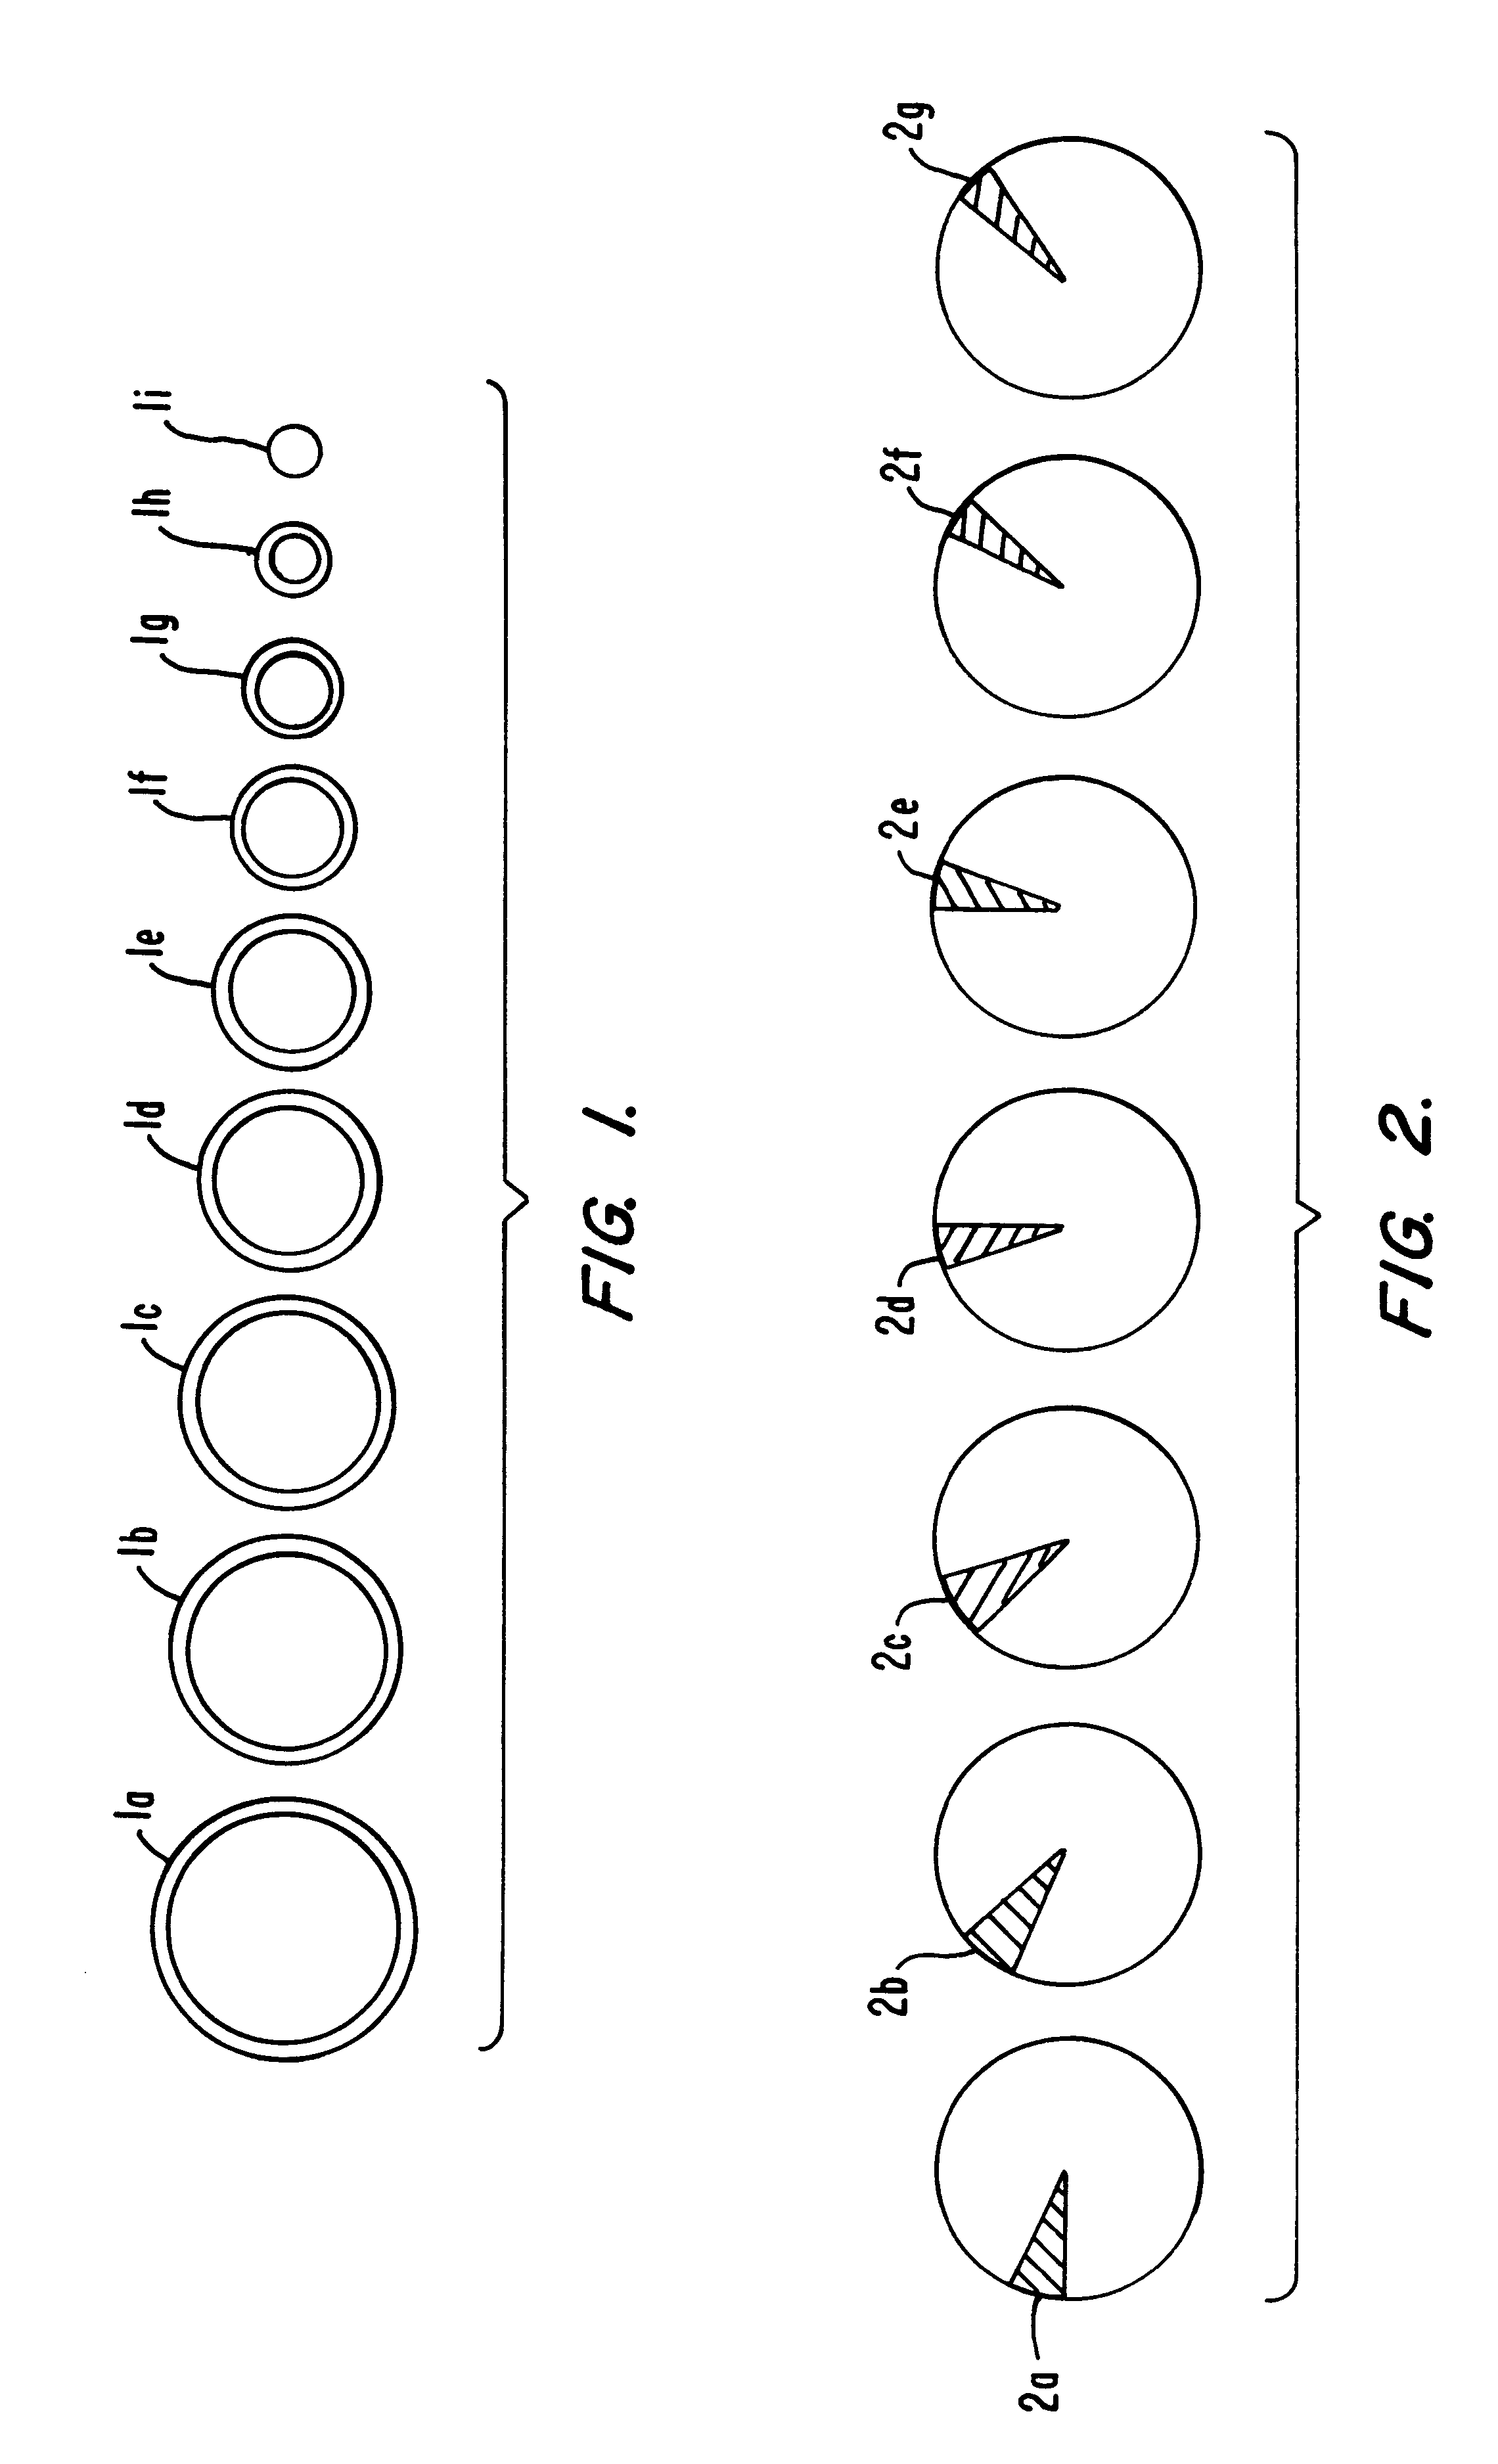 Method for scanning non-overlapping patterns of laser energy with diffractive optics